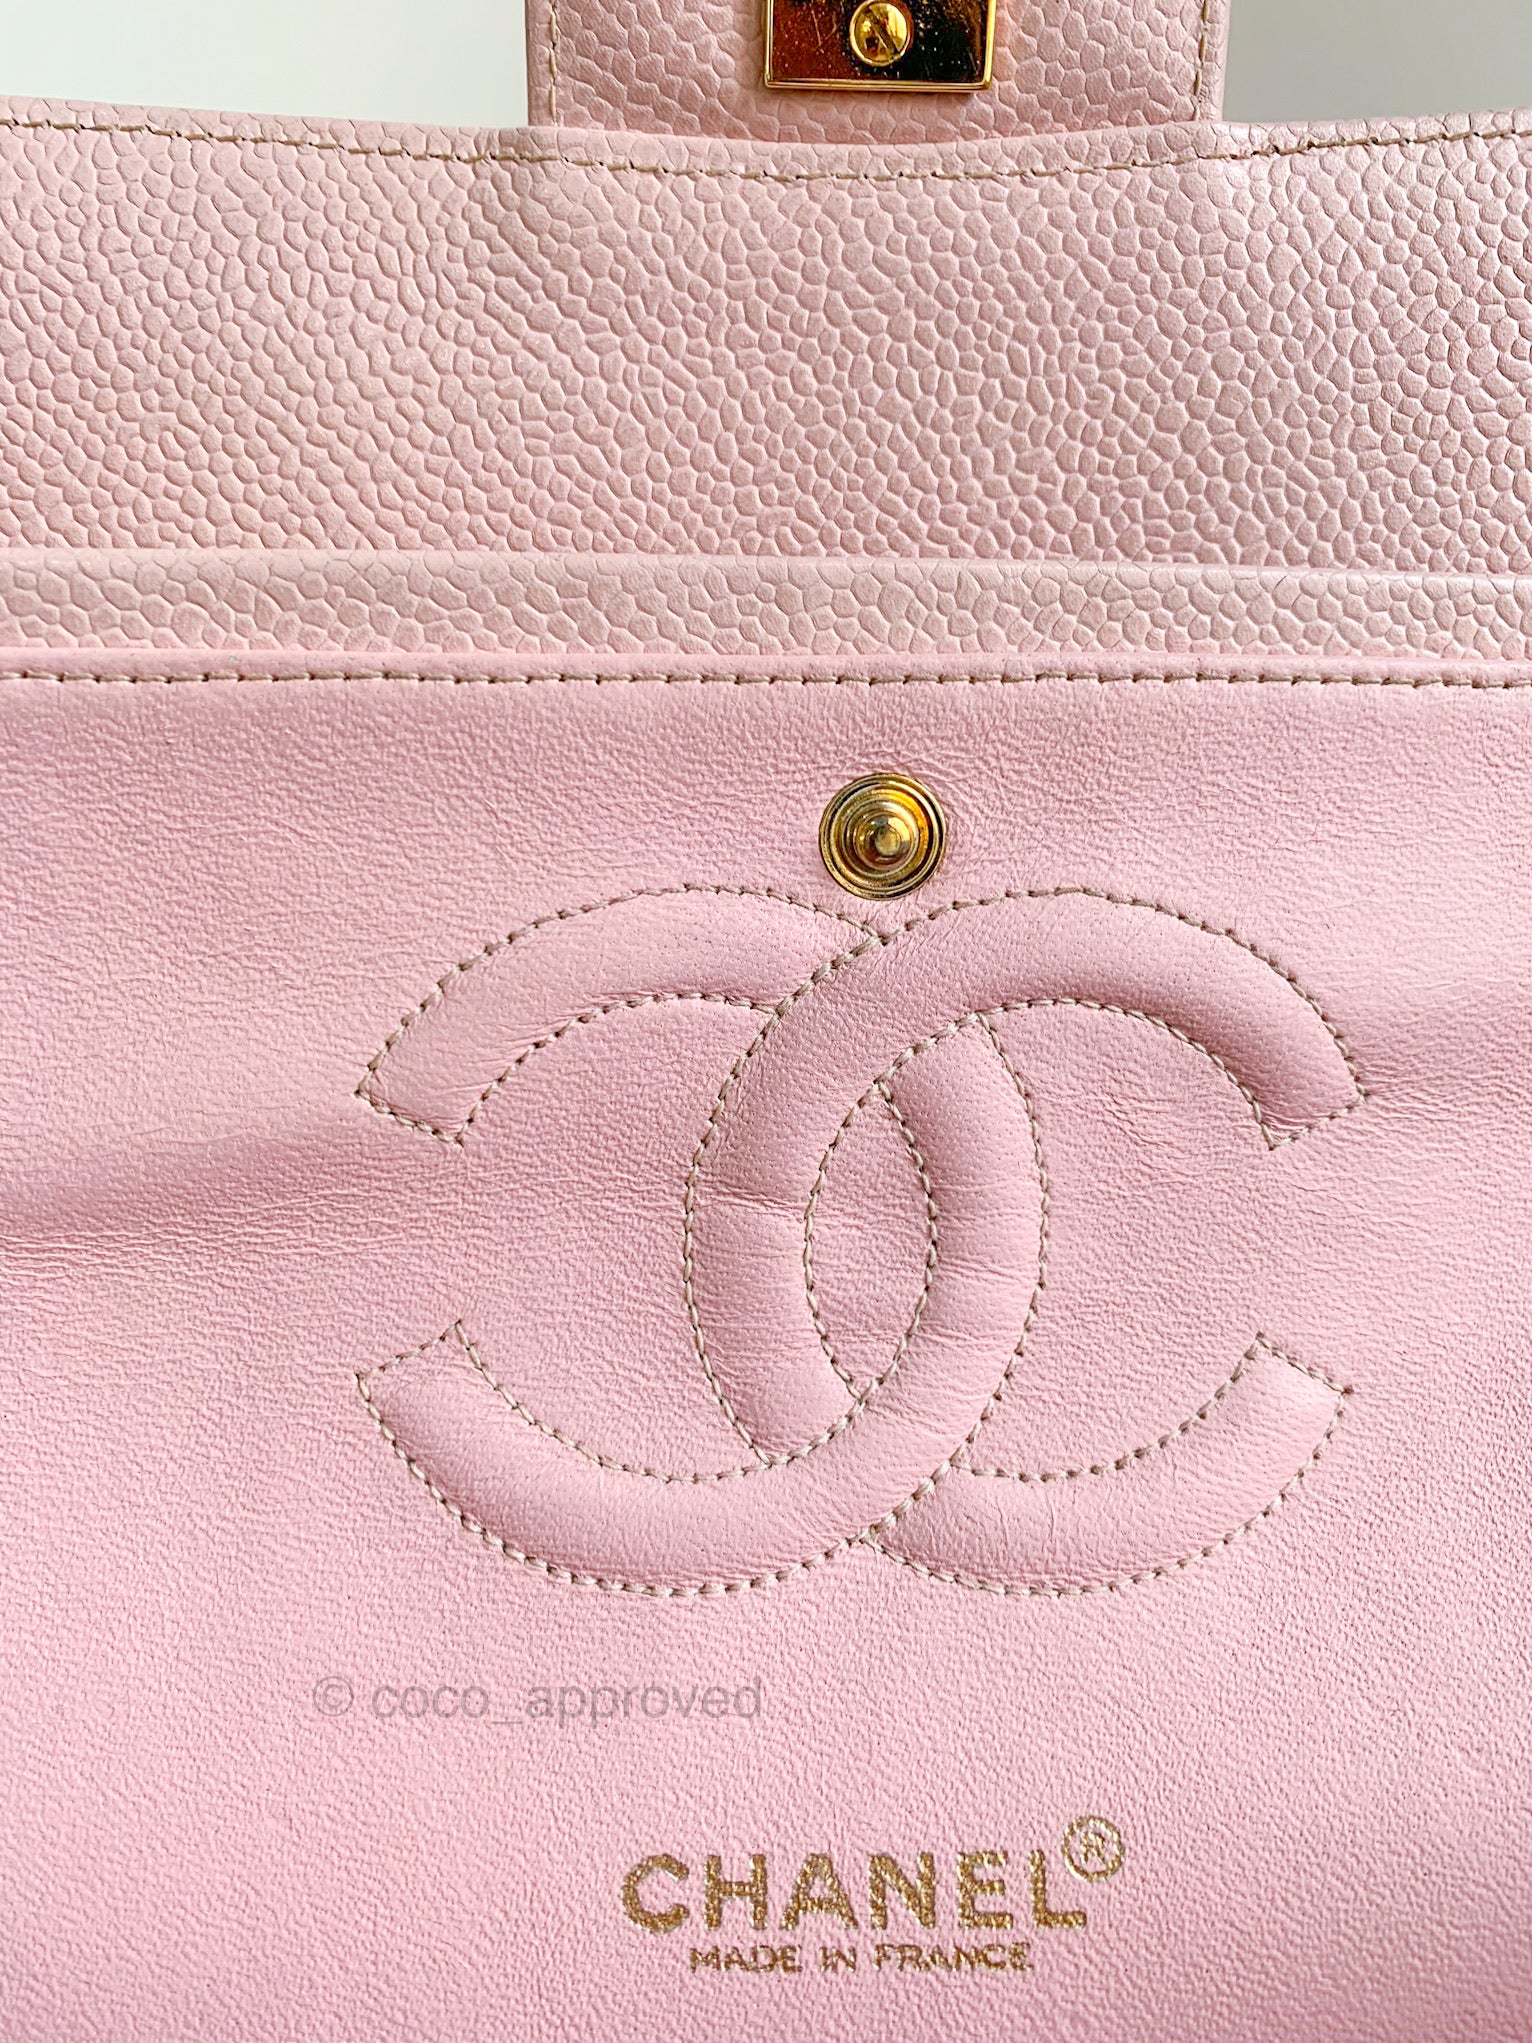 CHANEL, Bags, Chanel Around 998 Made Limited Edition Millennium 205 Bag  Salmon Pink